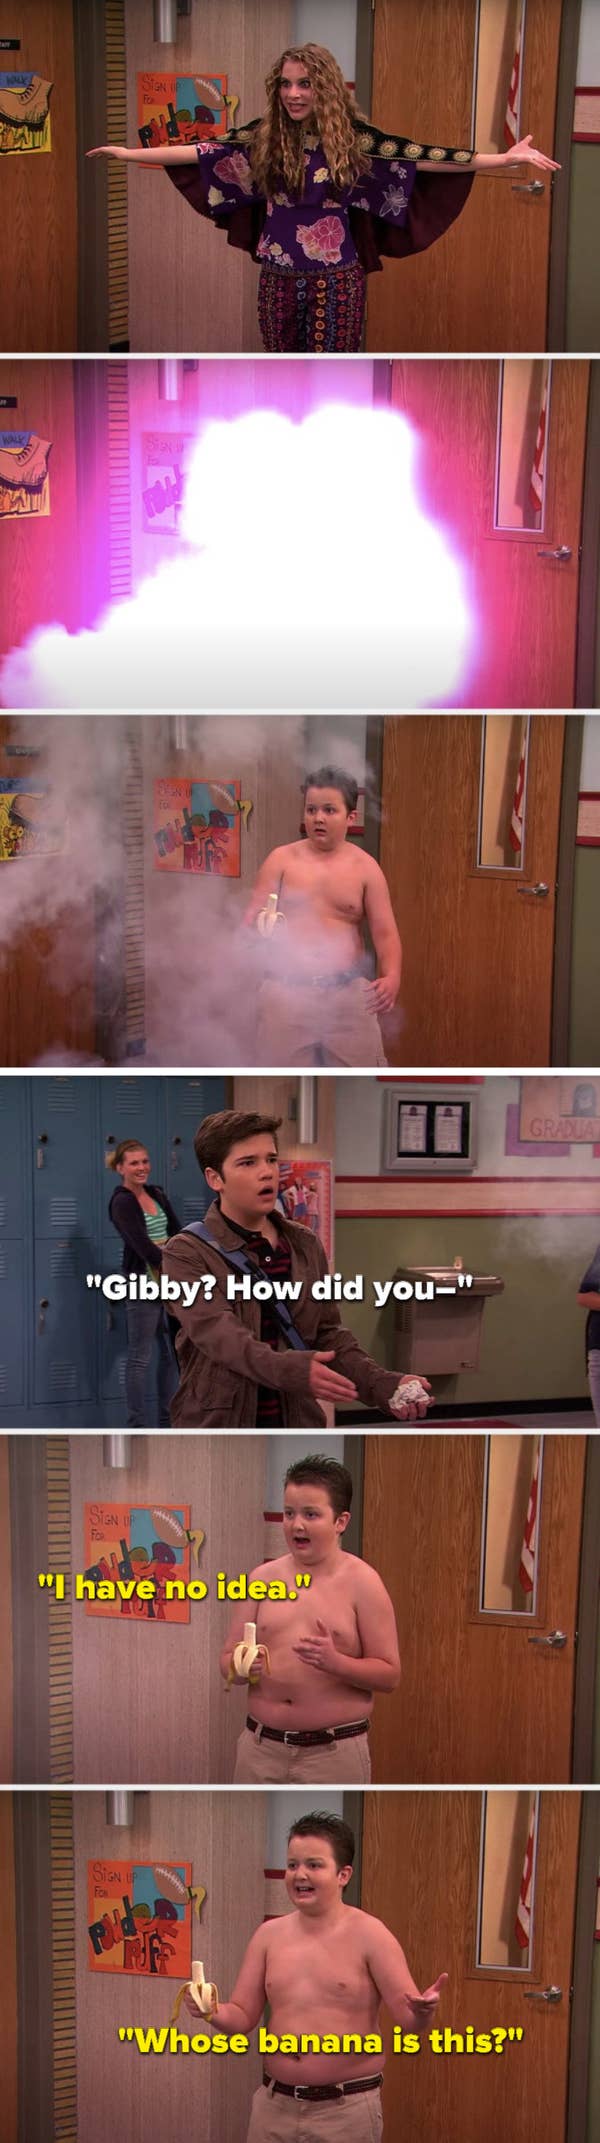 A woman does a magic trick to make her disappear and Gibby appear shirtless holding a banana, Freddie says, &quot;Gibby? How did you–&quot; and Gibby says, &quot;I have no idea. Whose banana is this?&quot;